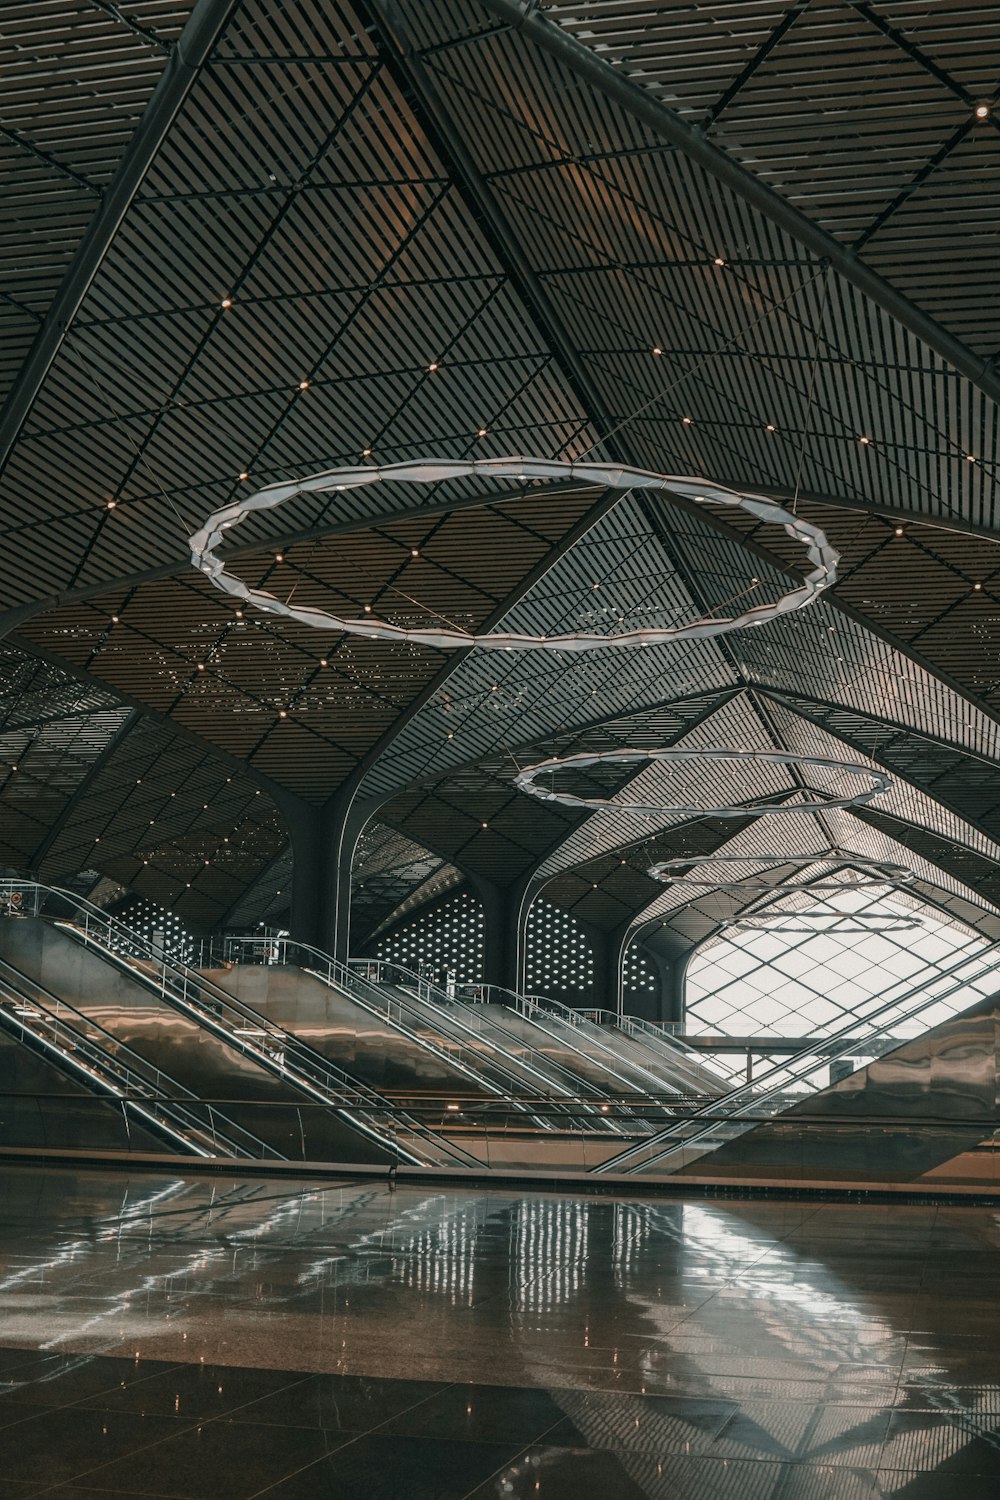 a large open space with a circular metal object hanging from the ceiling